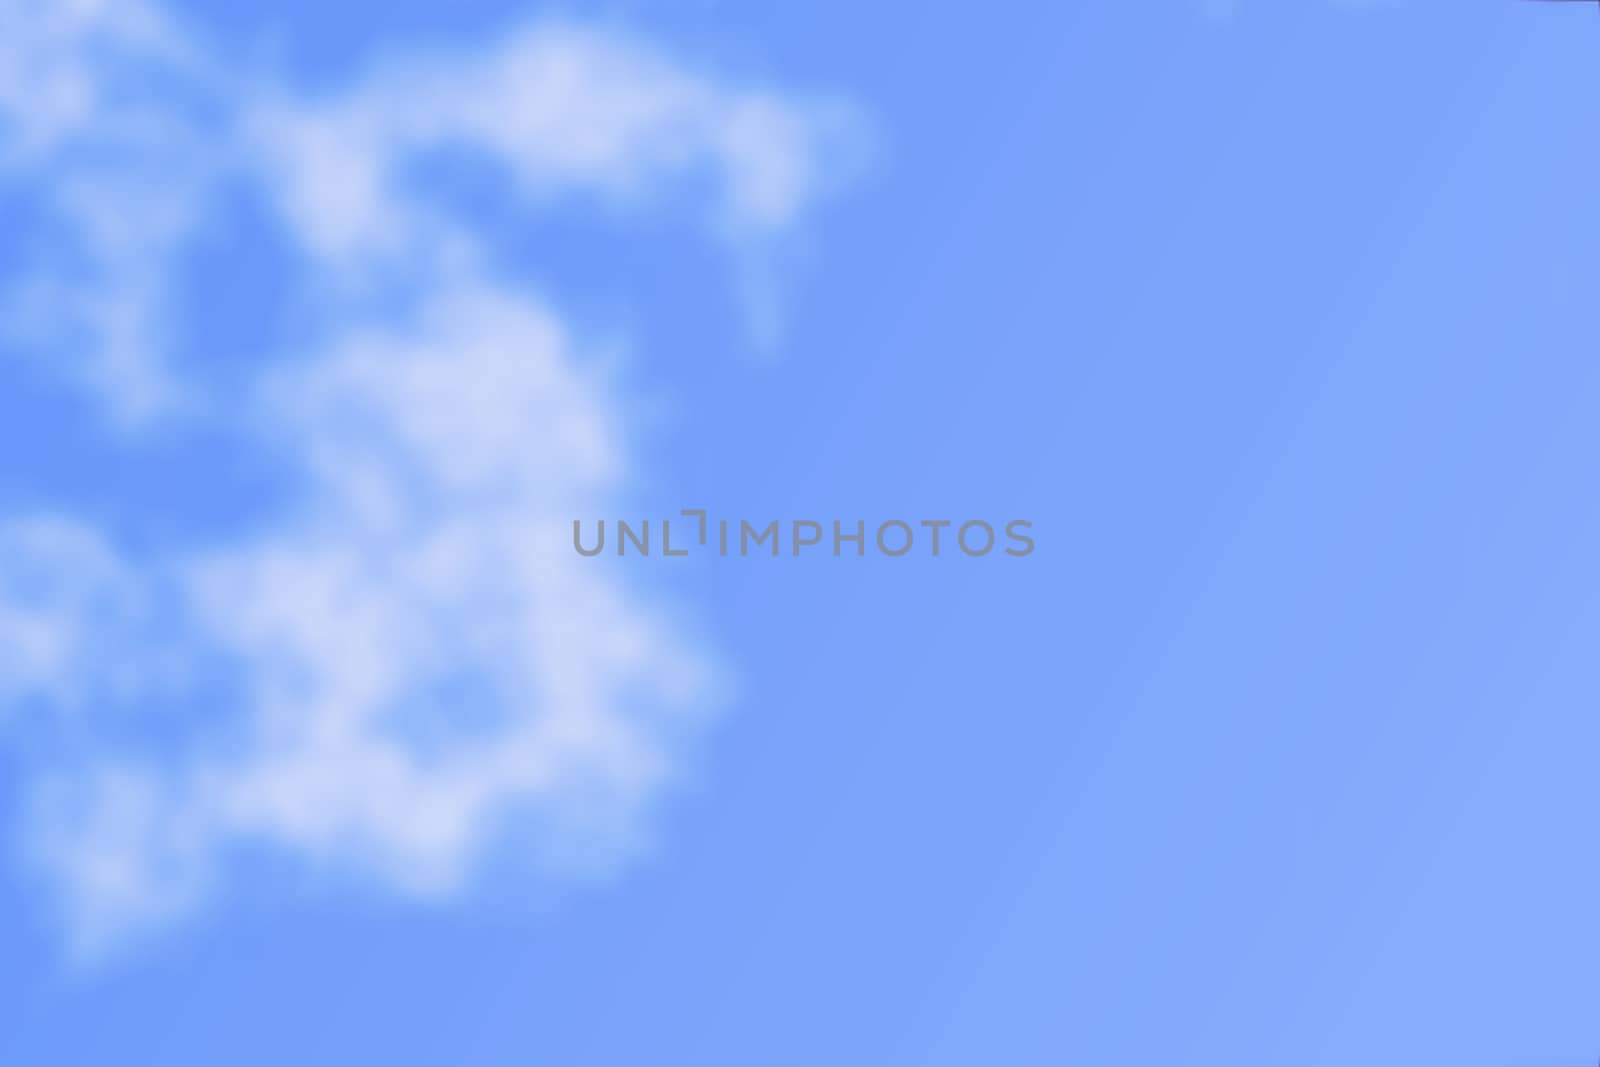 Soft white clouds with blue sky, abstract background by mouu007